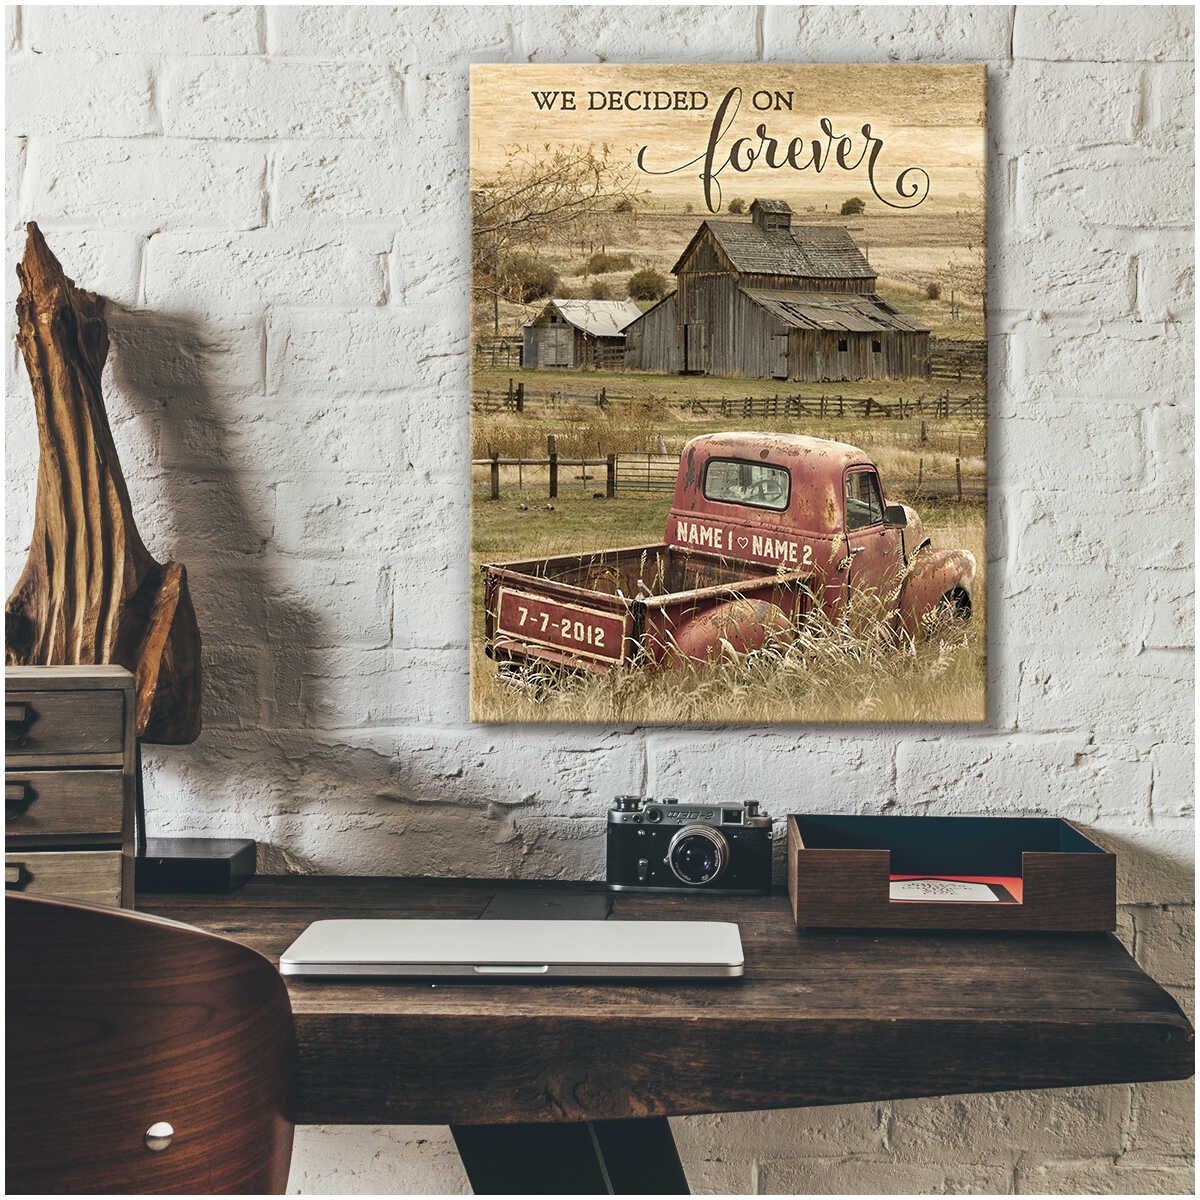 We Decided On Forever Old Barn And Truck Custom Personalized Canvas Prints Wall Art Decor